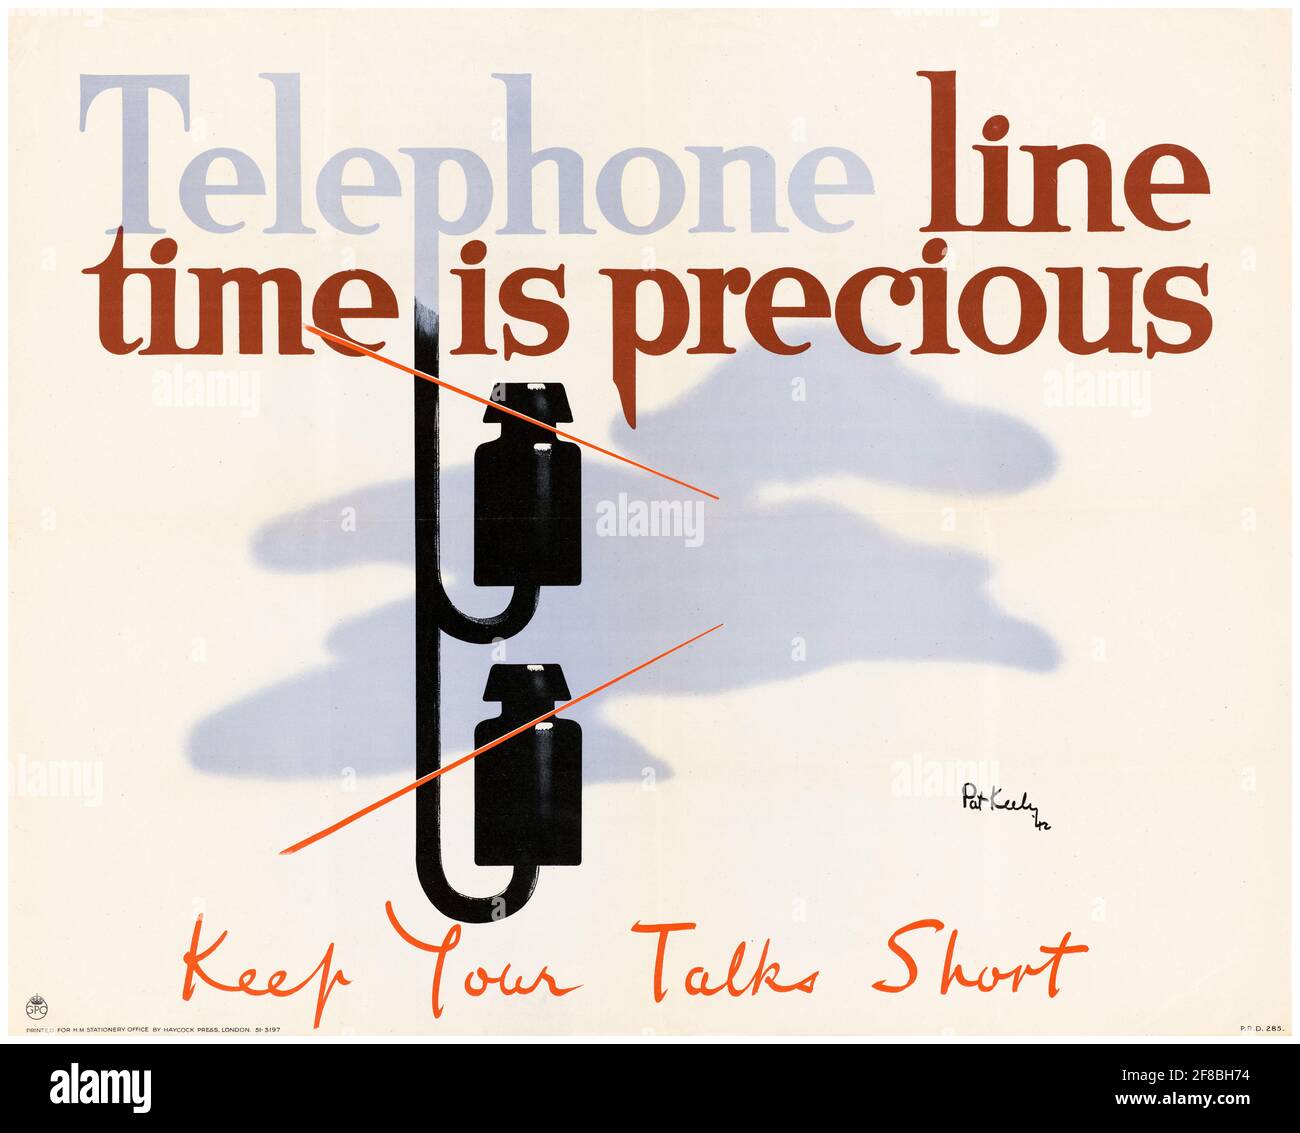 British, WW2 Saving resources poster, Telephone Line Time is Precious, Keep Your Talks Short, 1942-1945 Stock Photo